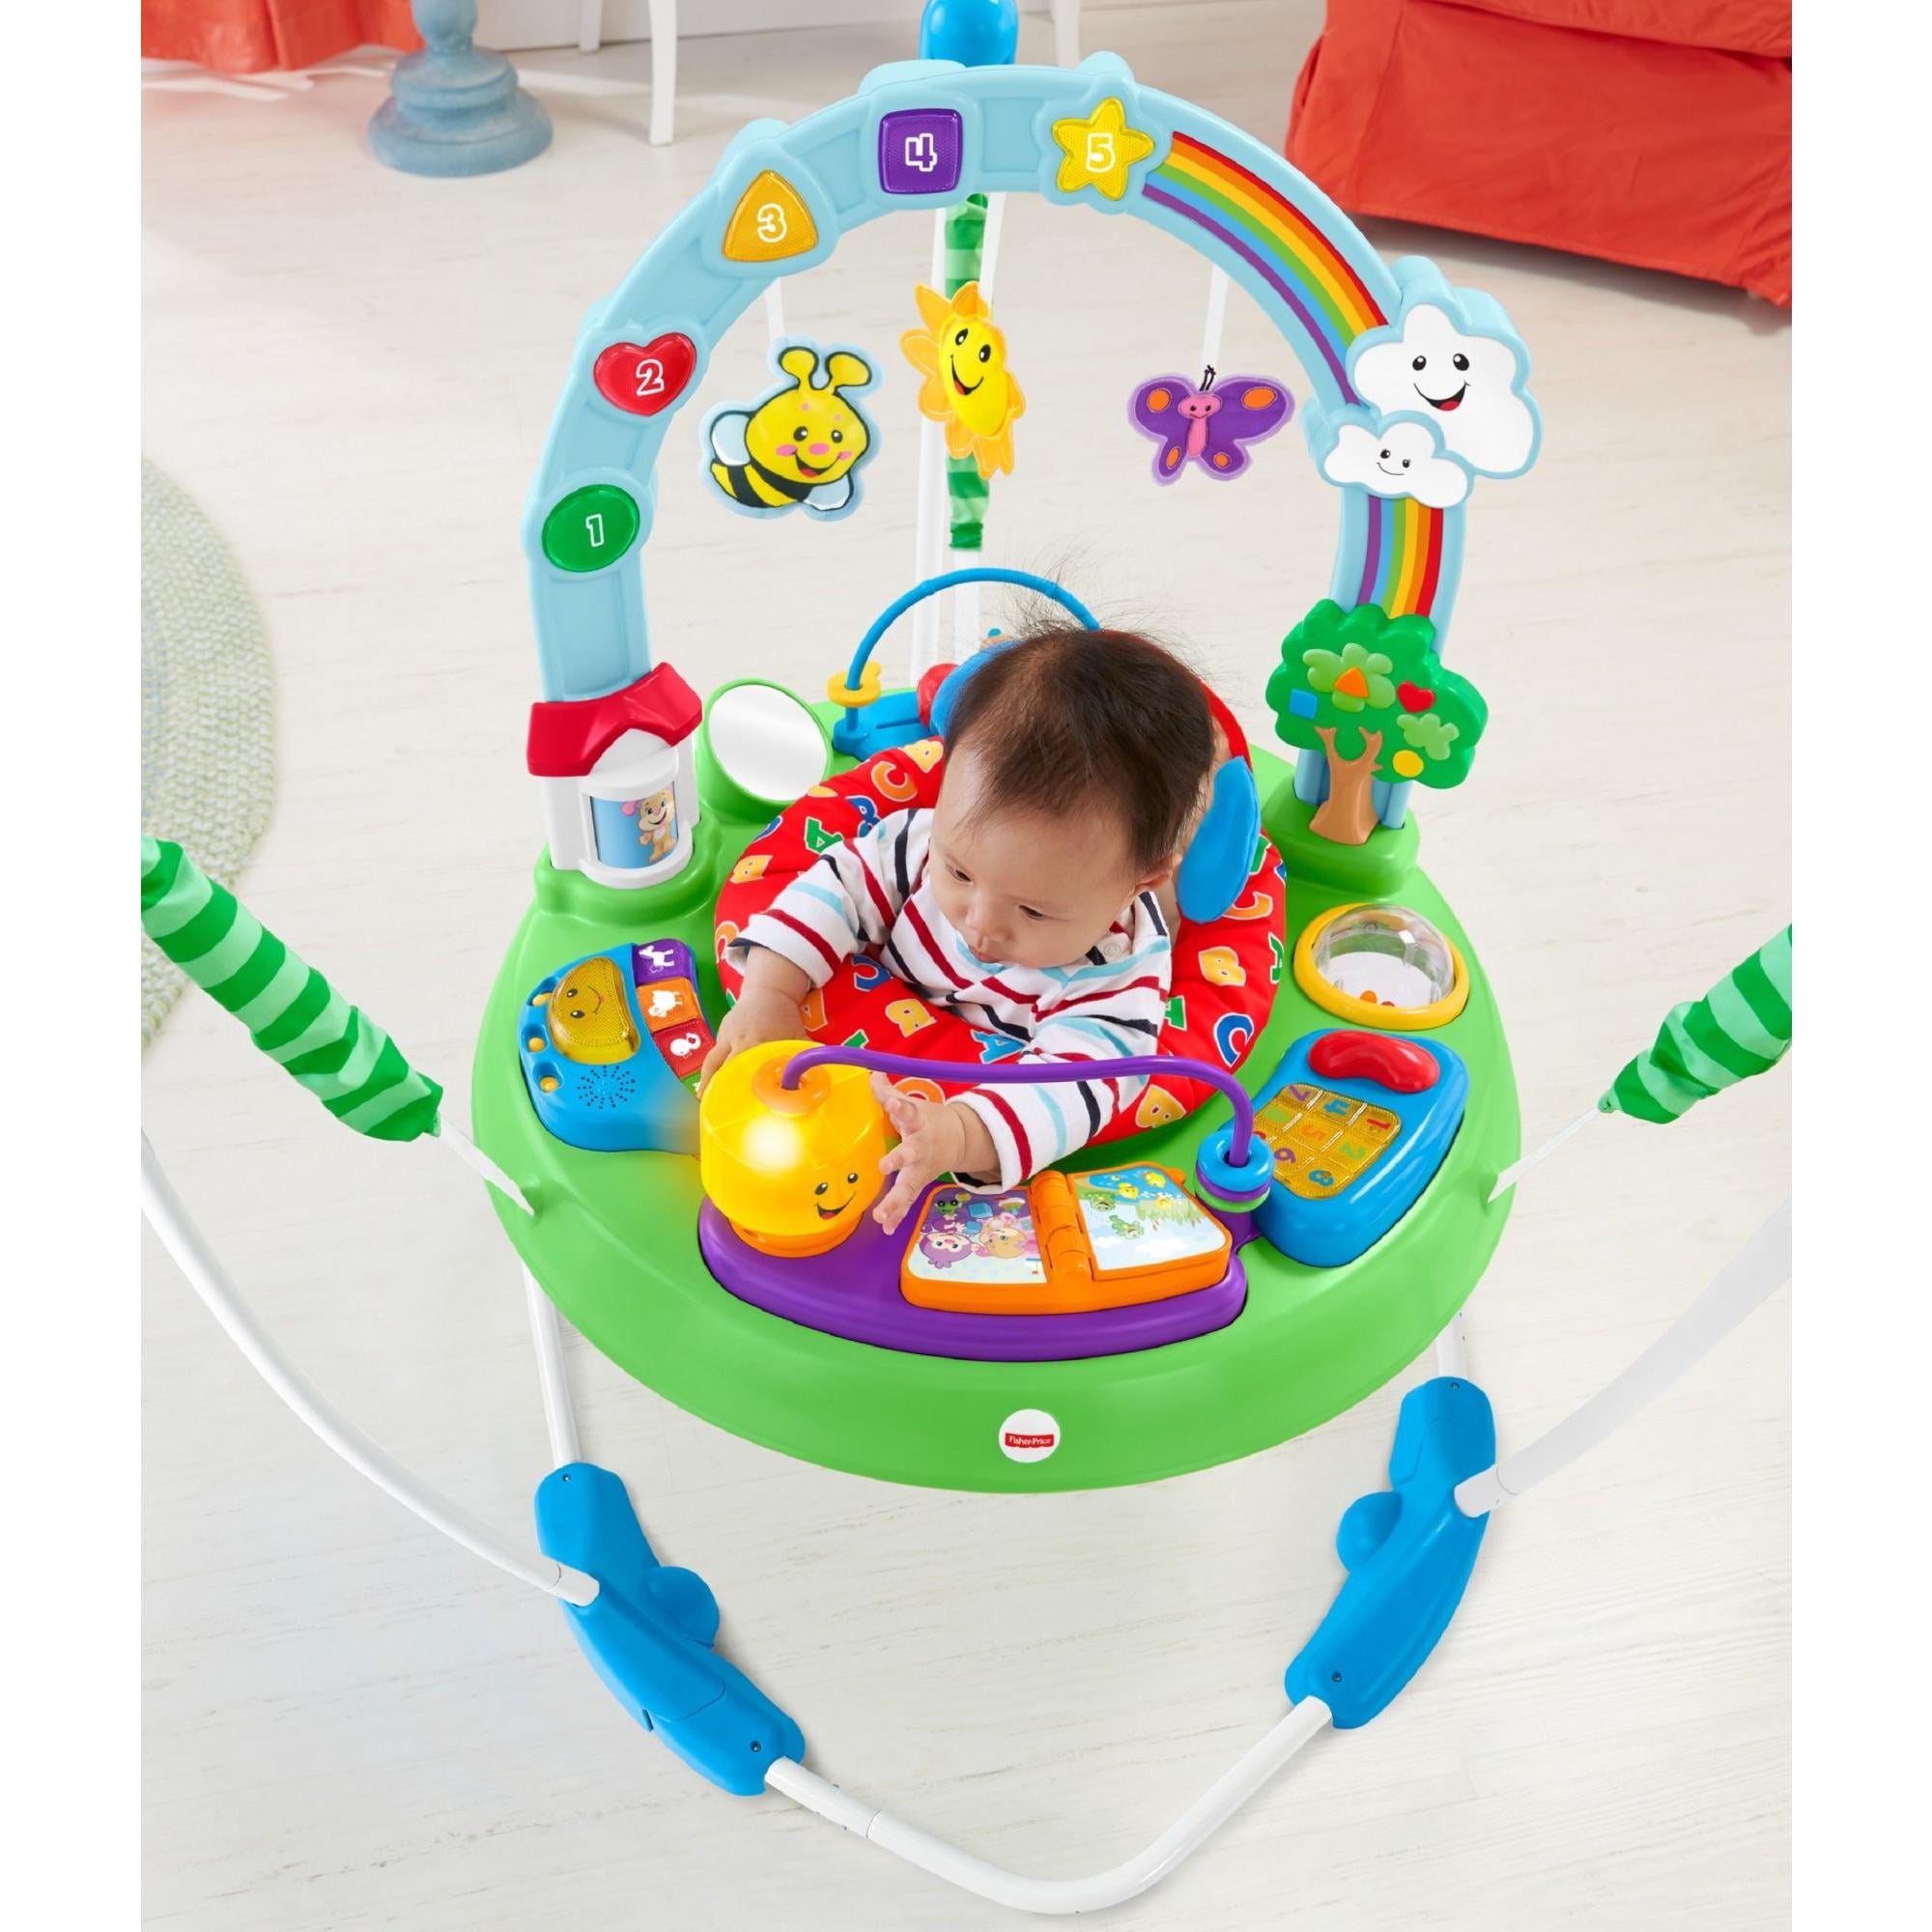 fisher price puppy's activity jumperoo